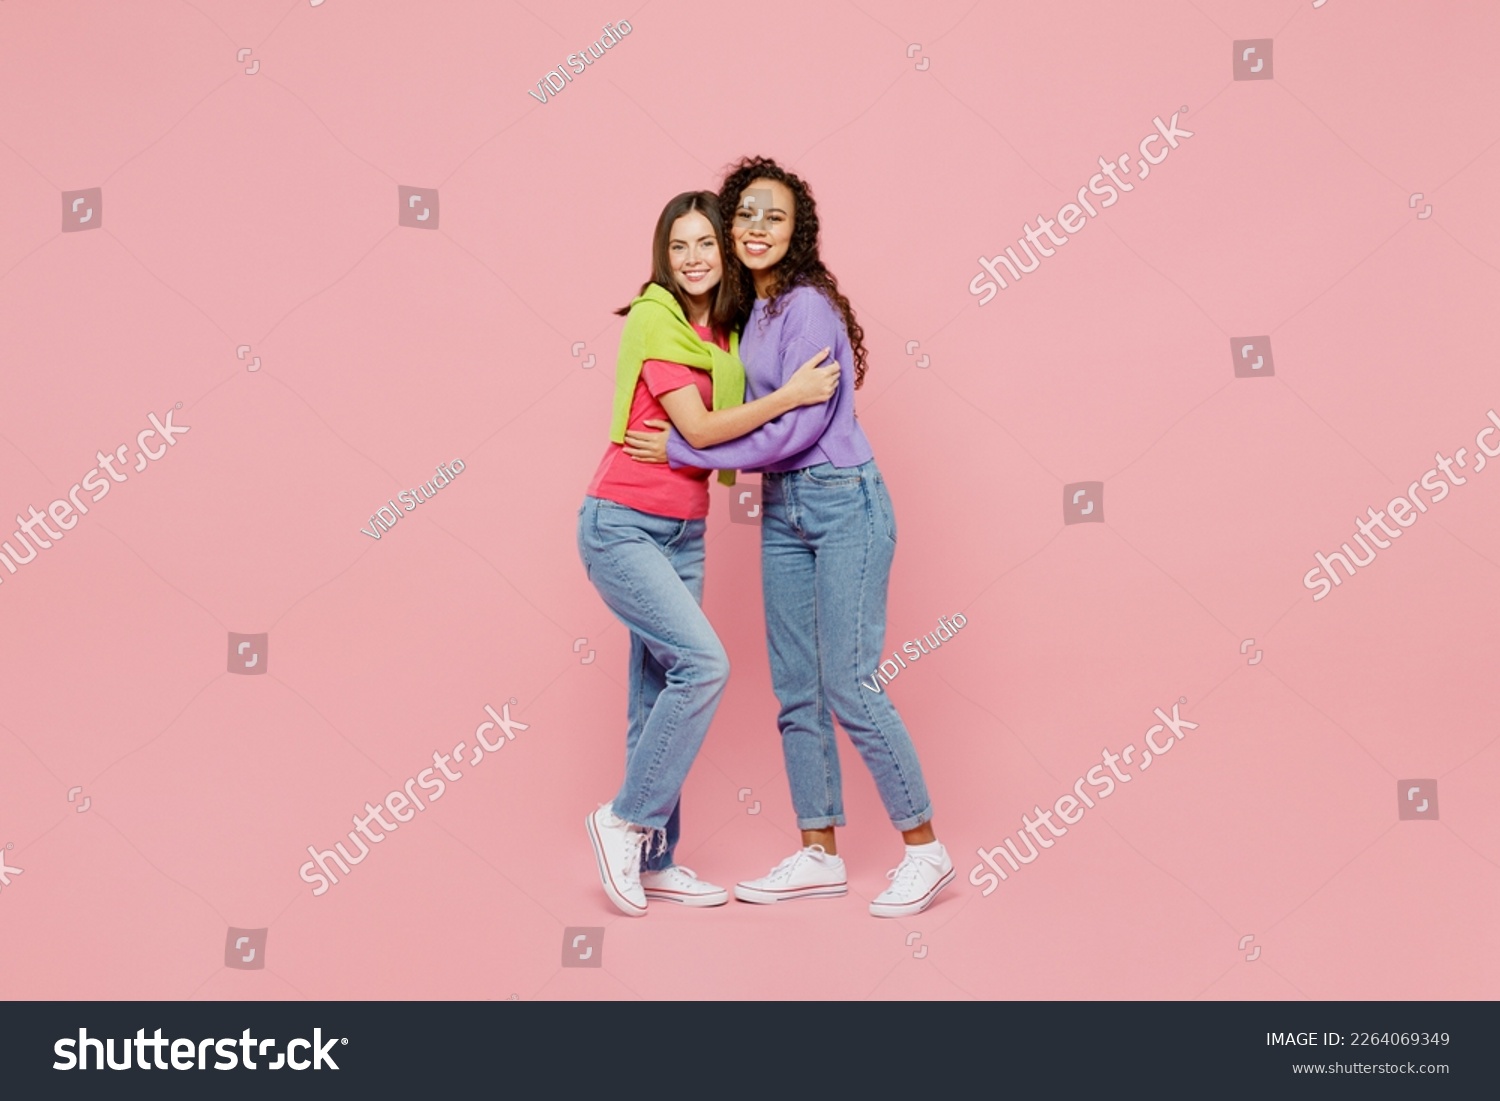 Full body young two friends smiling happy fun cool cheerful positive women 20s wear green purple shirts together stand look camera hug homie isolated on pastel plain light pink color background studio #2264069349